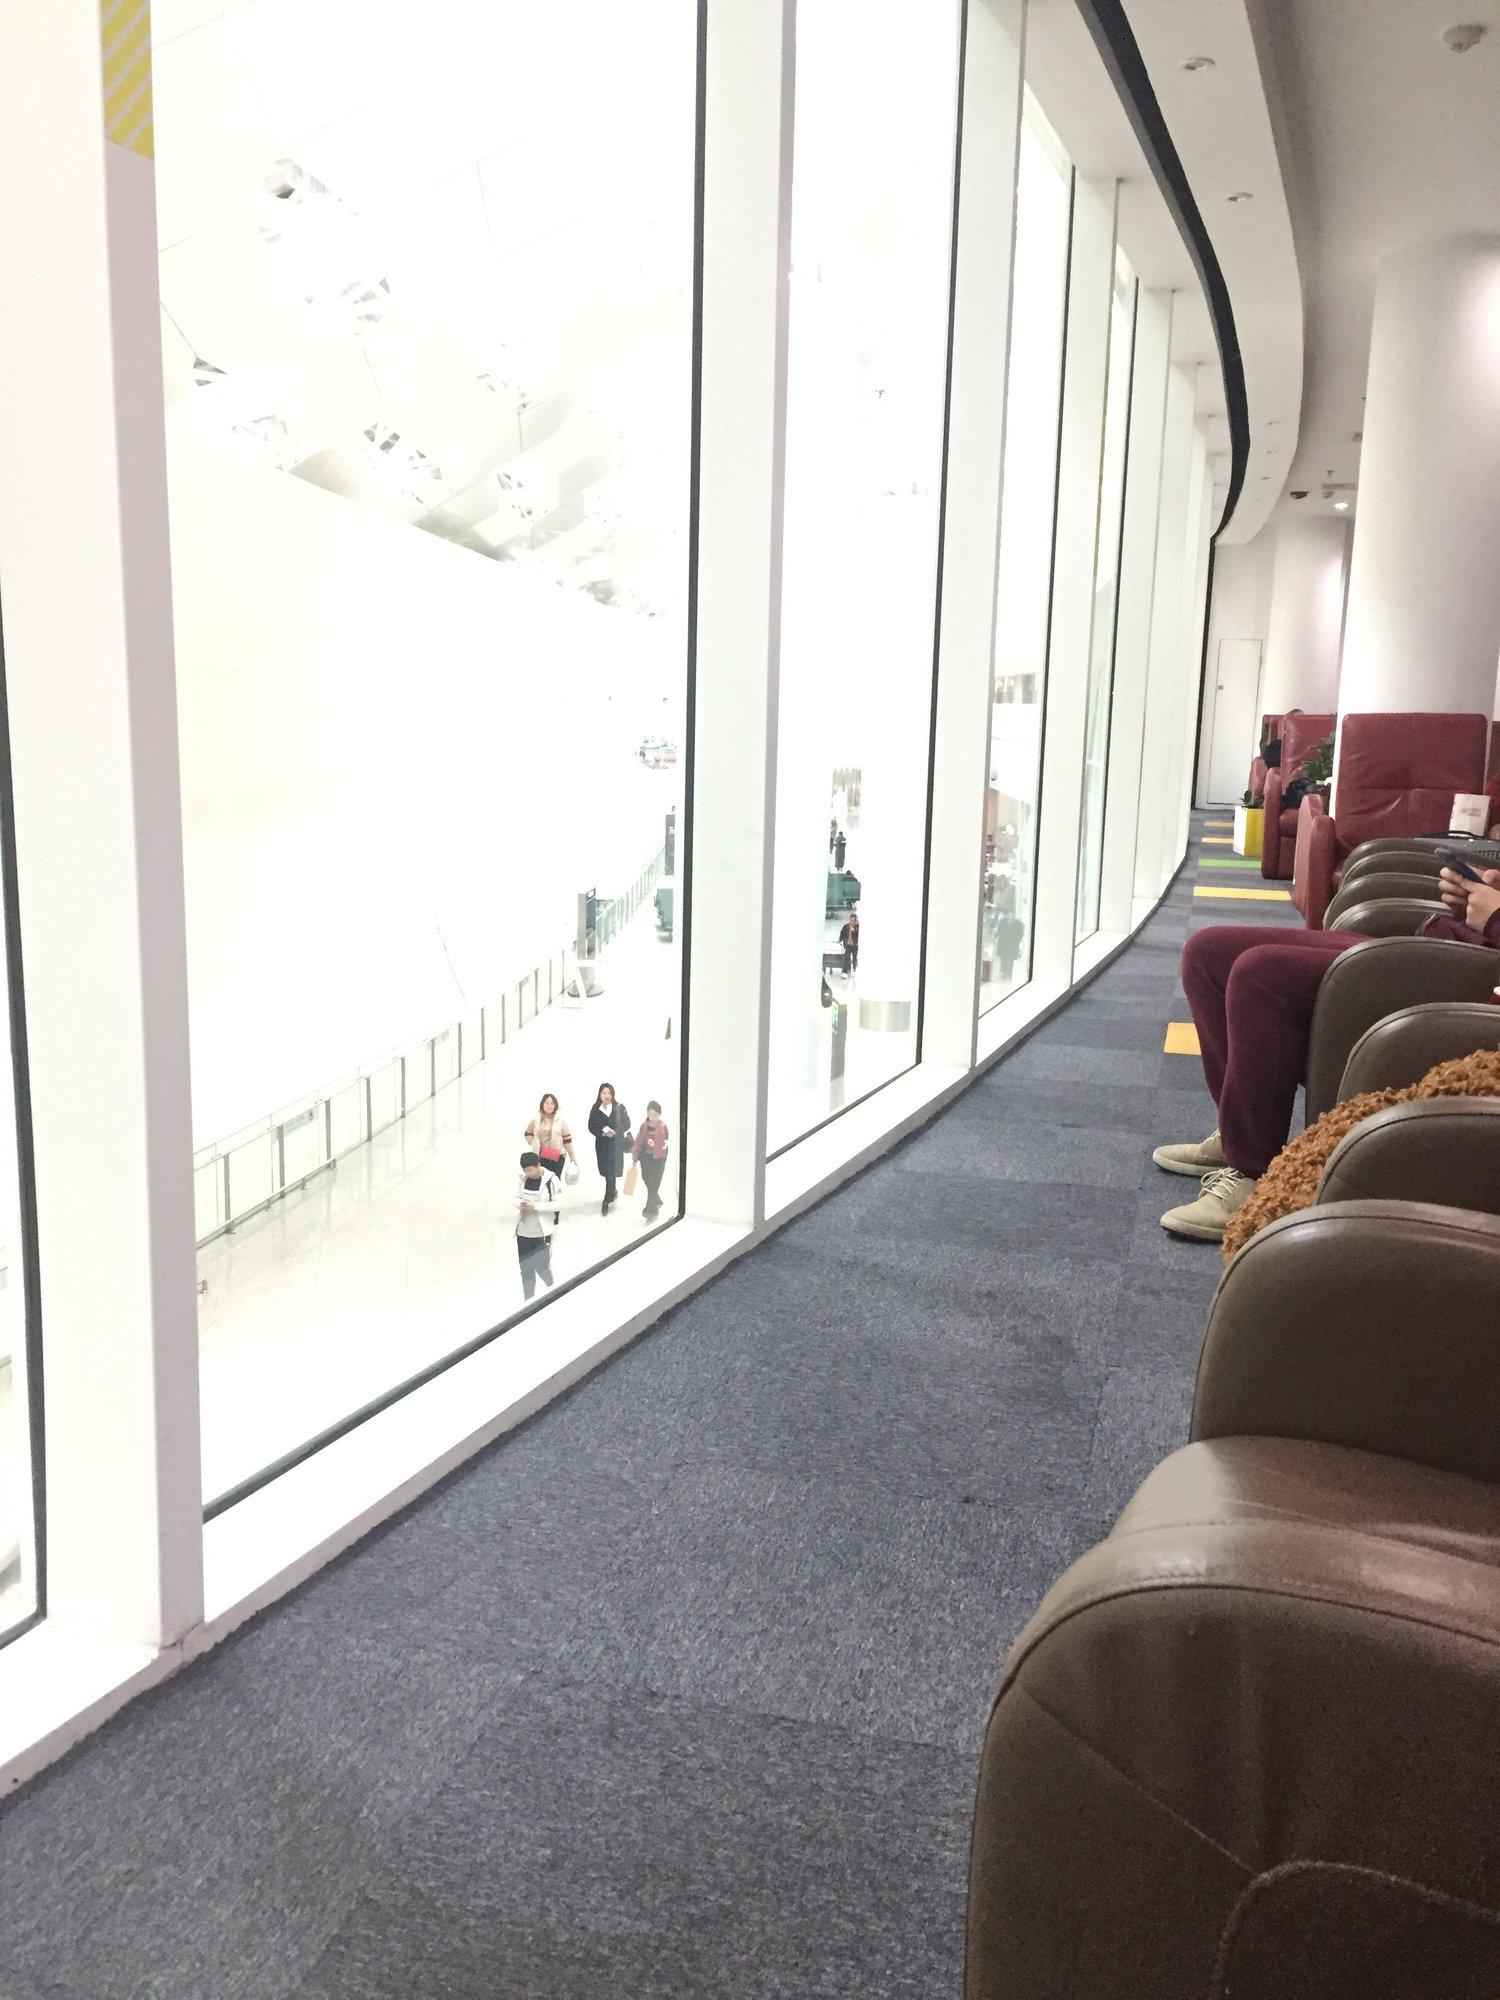 Shenzhen Airport First & Business Class Lounge (Joyee 1) (Closed For Renovation - Temporary Location Available) image 1 of 8